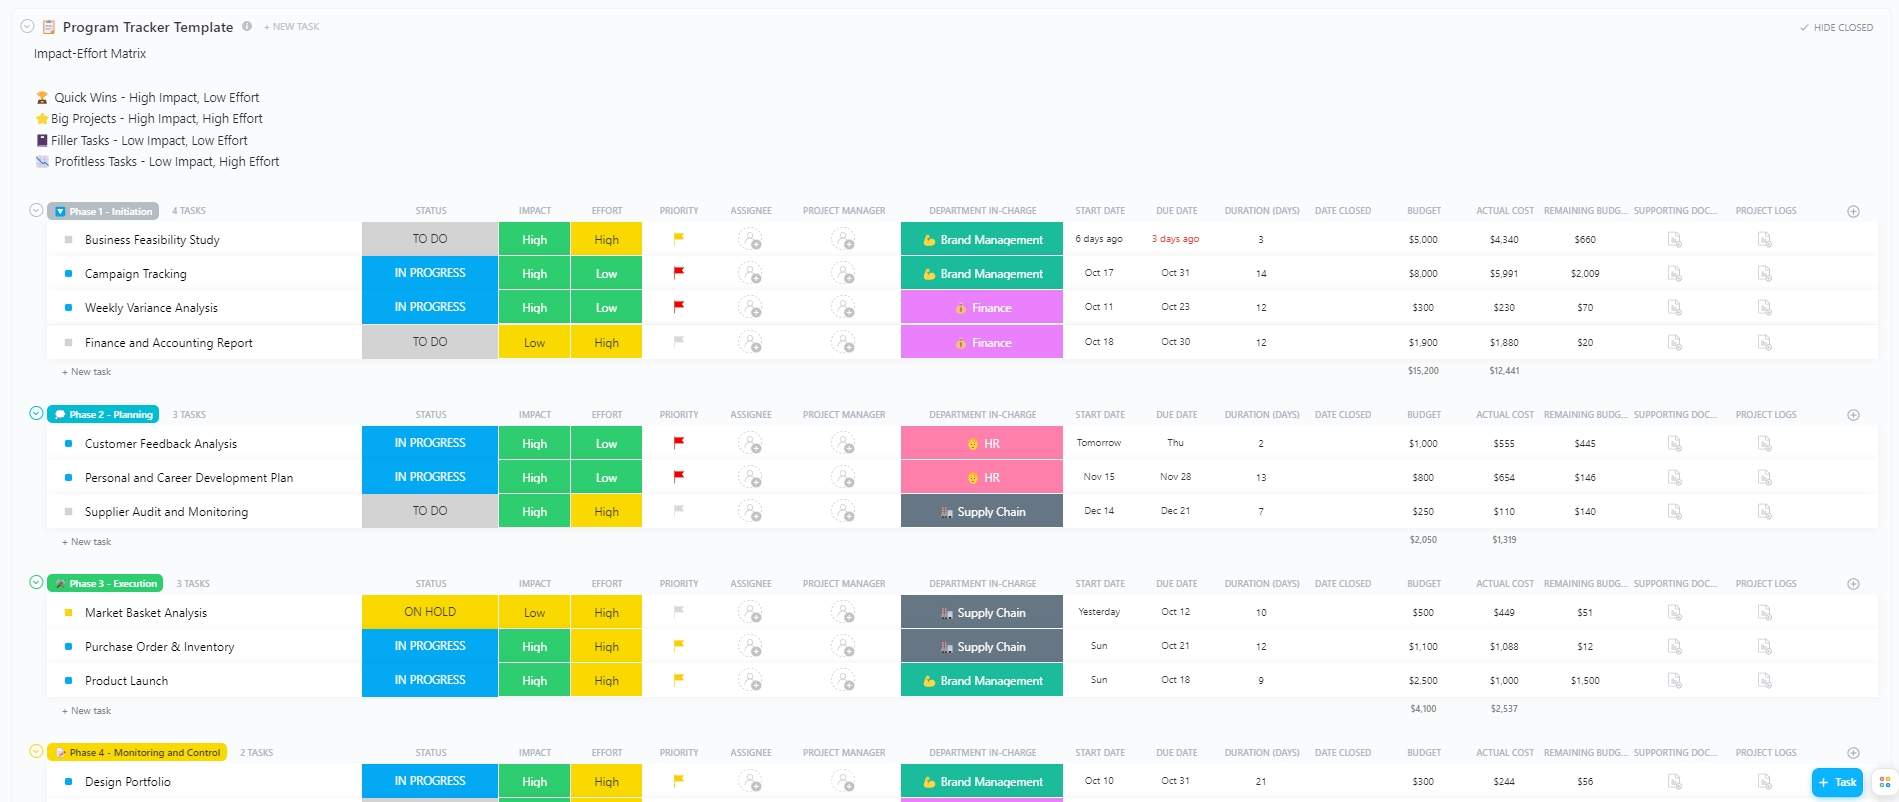 This template enables the team to track the progress of each project in the pipeline and assess project importance and priority. The different views also allow the user to determine the timeline per department and the work capacity of each member.